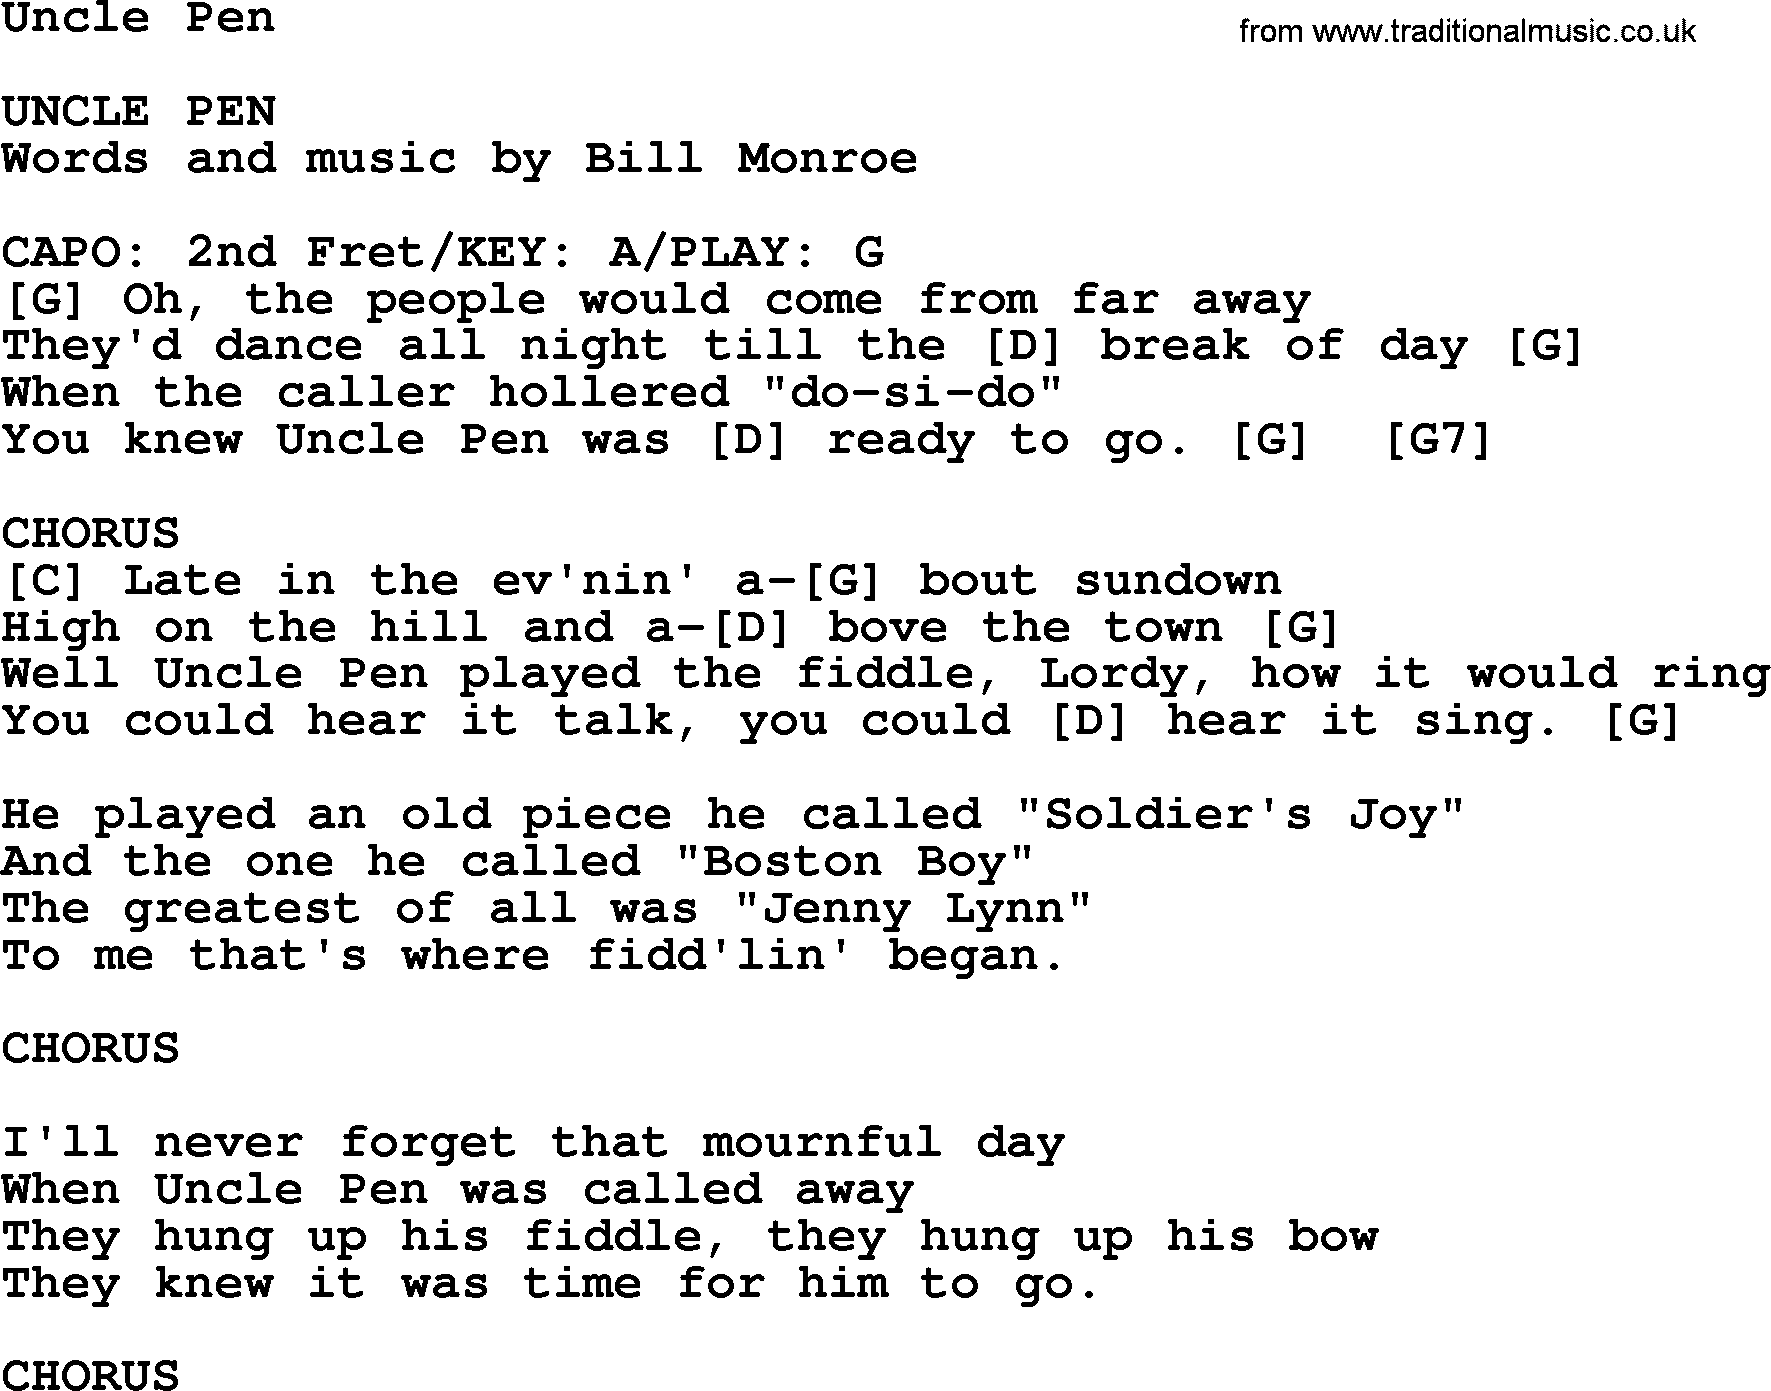 Bluegrass song: Uncle Pen, lyrics and chords